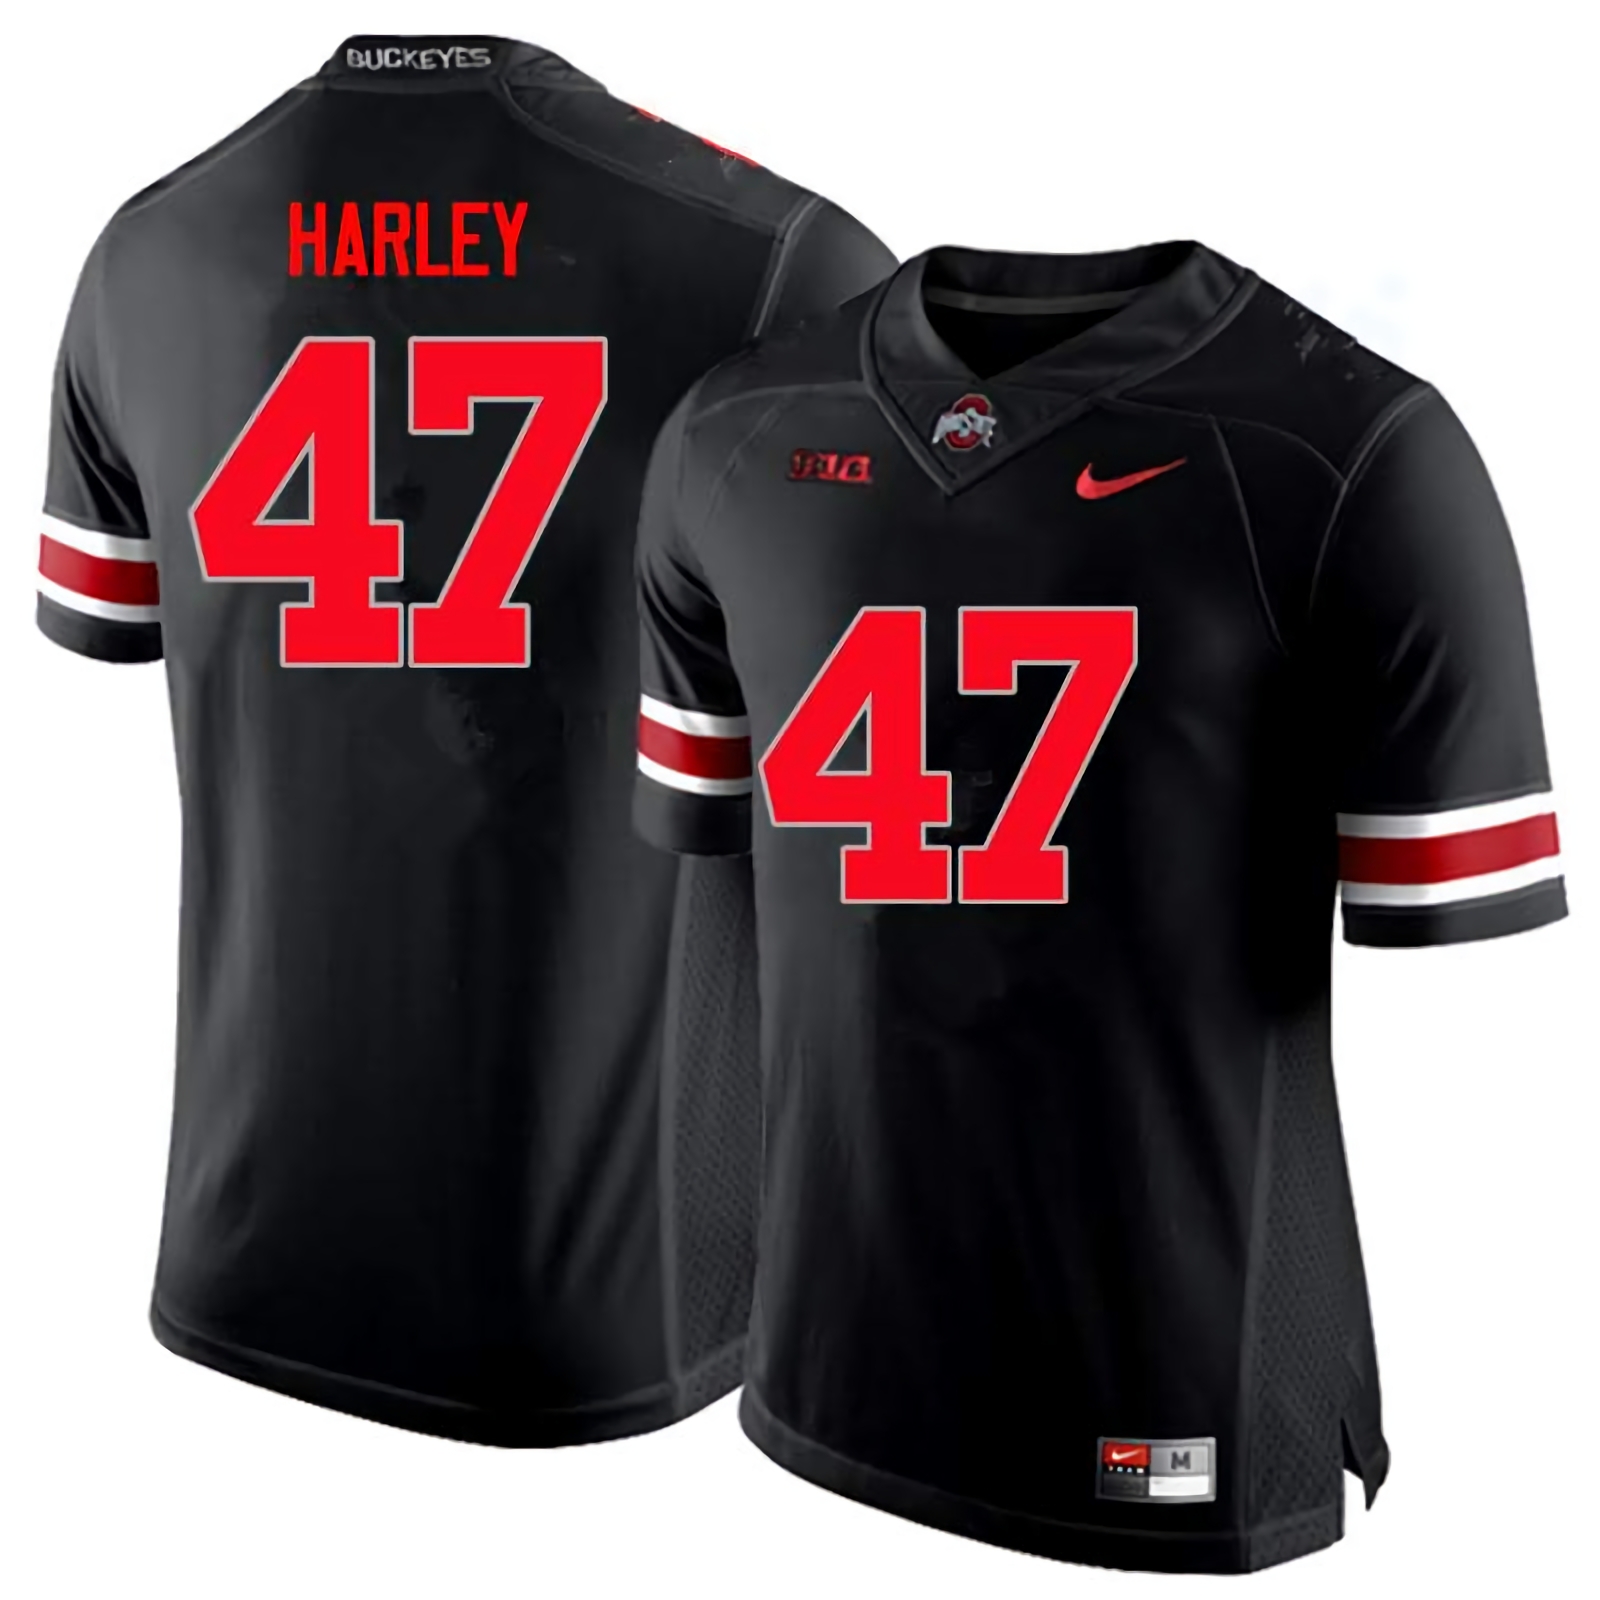 Chic Harley Ohio State Buckeyes Men's NCAA #47 Nike Black Limited College Stitched Football Jersey SZB1256ZR